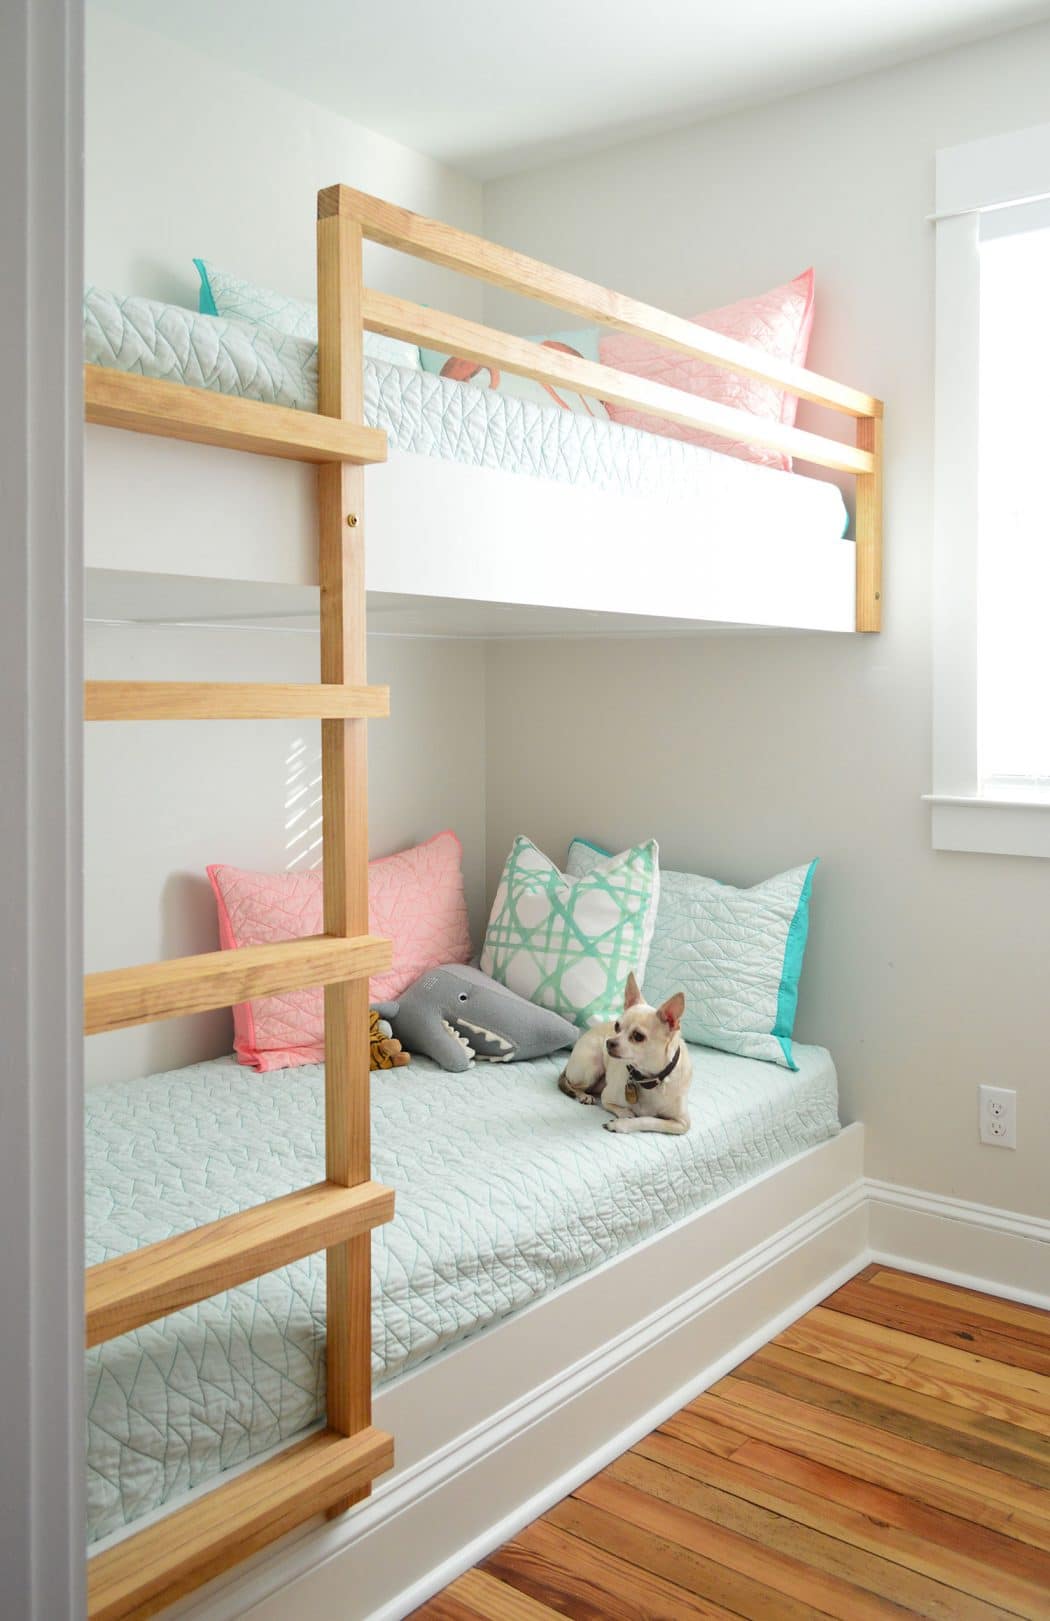 extra long bunk beds for adults